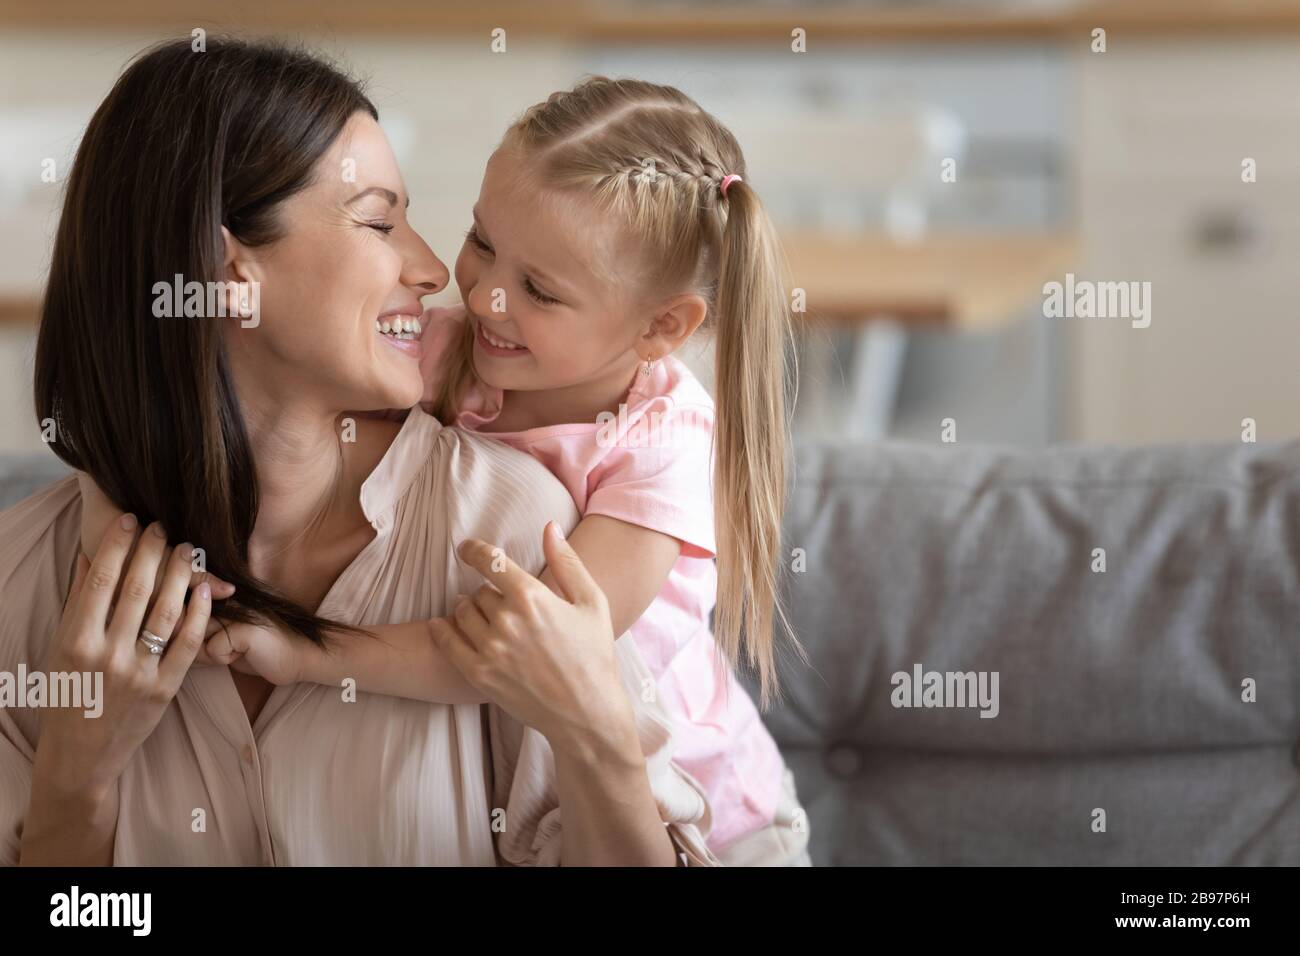 Little girl and young mom have fun cuddling at home Stock Photo